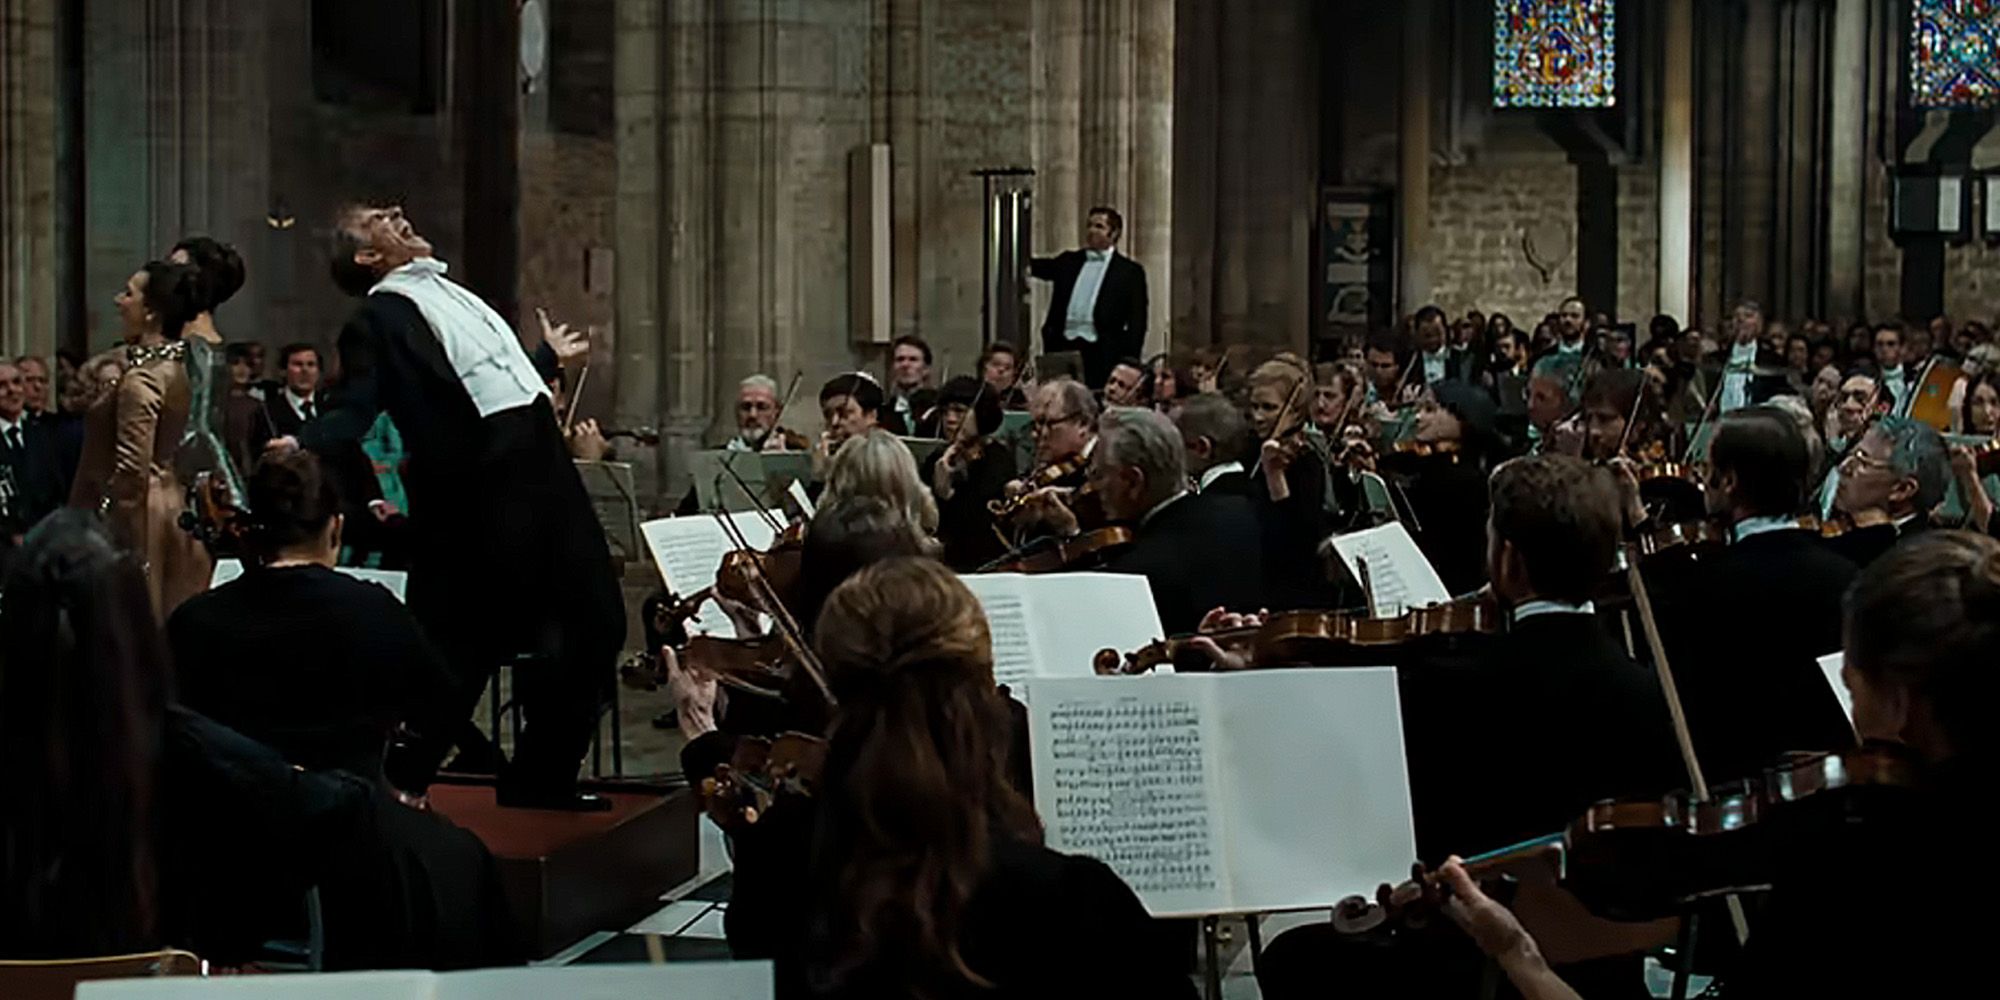 An orchestra playing in Maestro